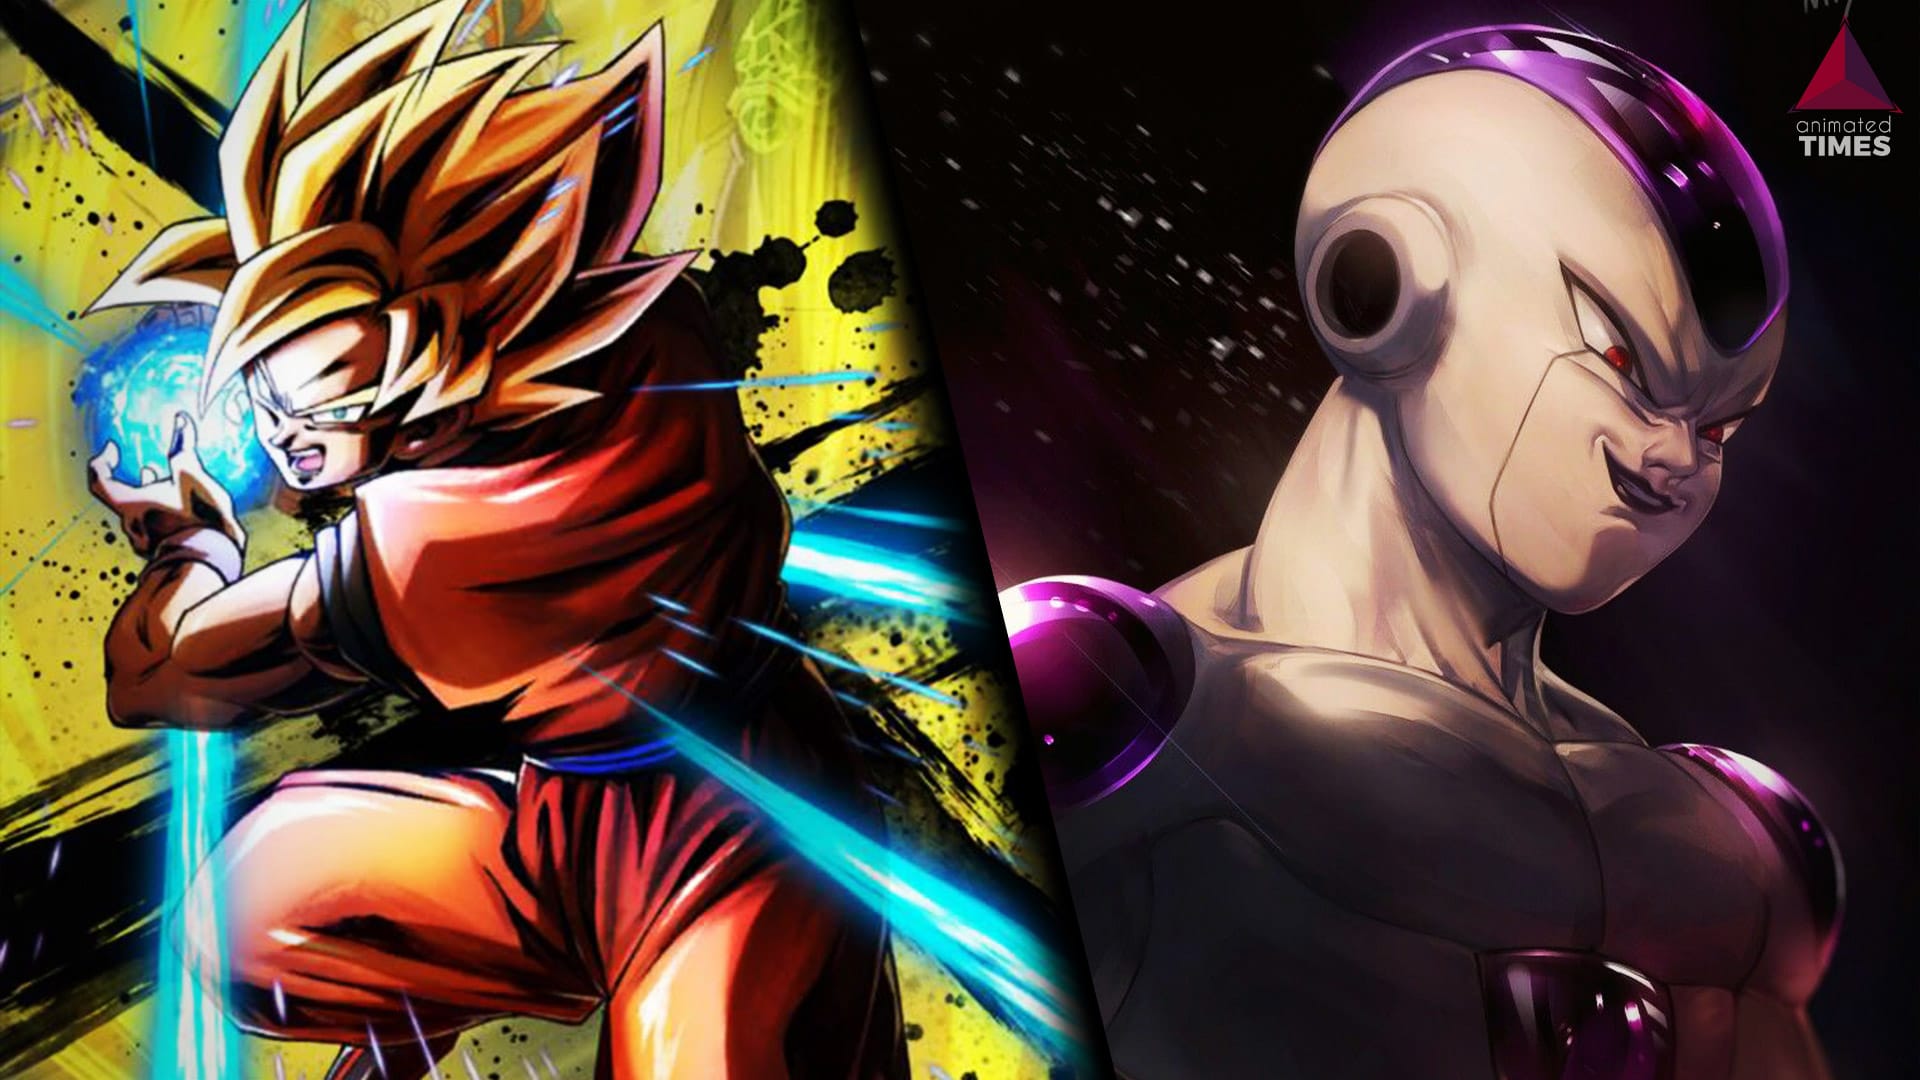 10 Crazy Plot Holes About Dragon Ball Villains To Make Your Head Spin